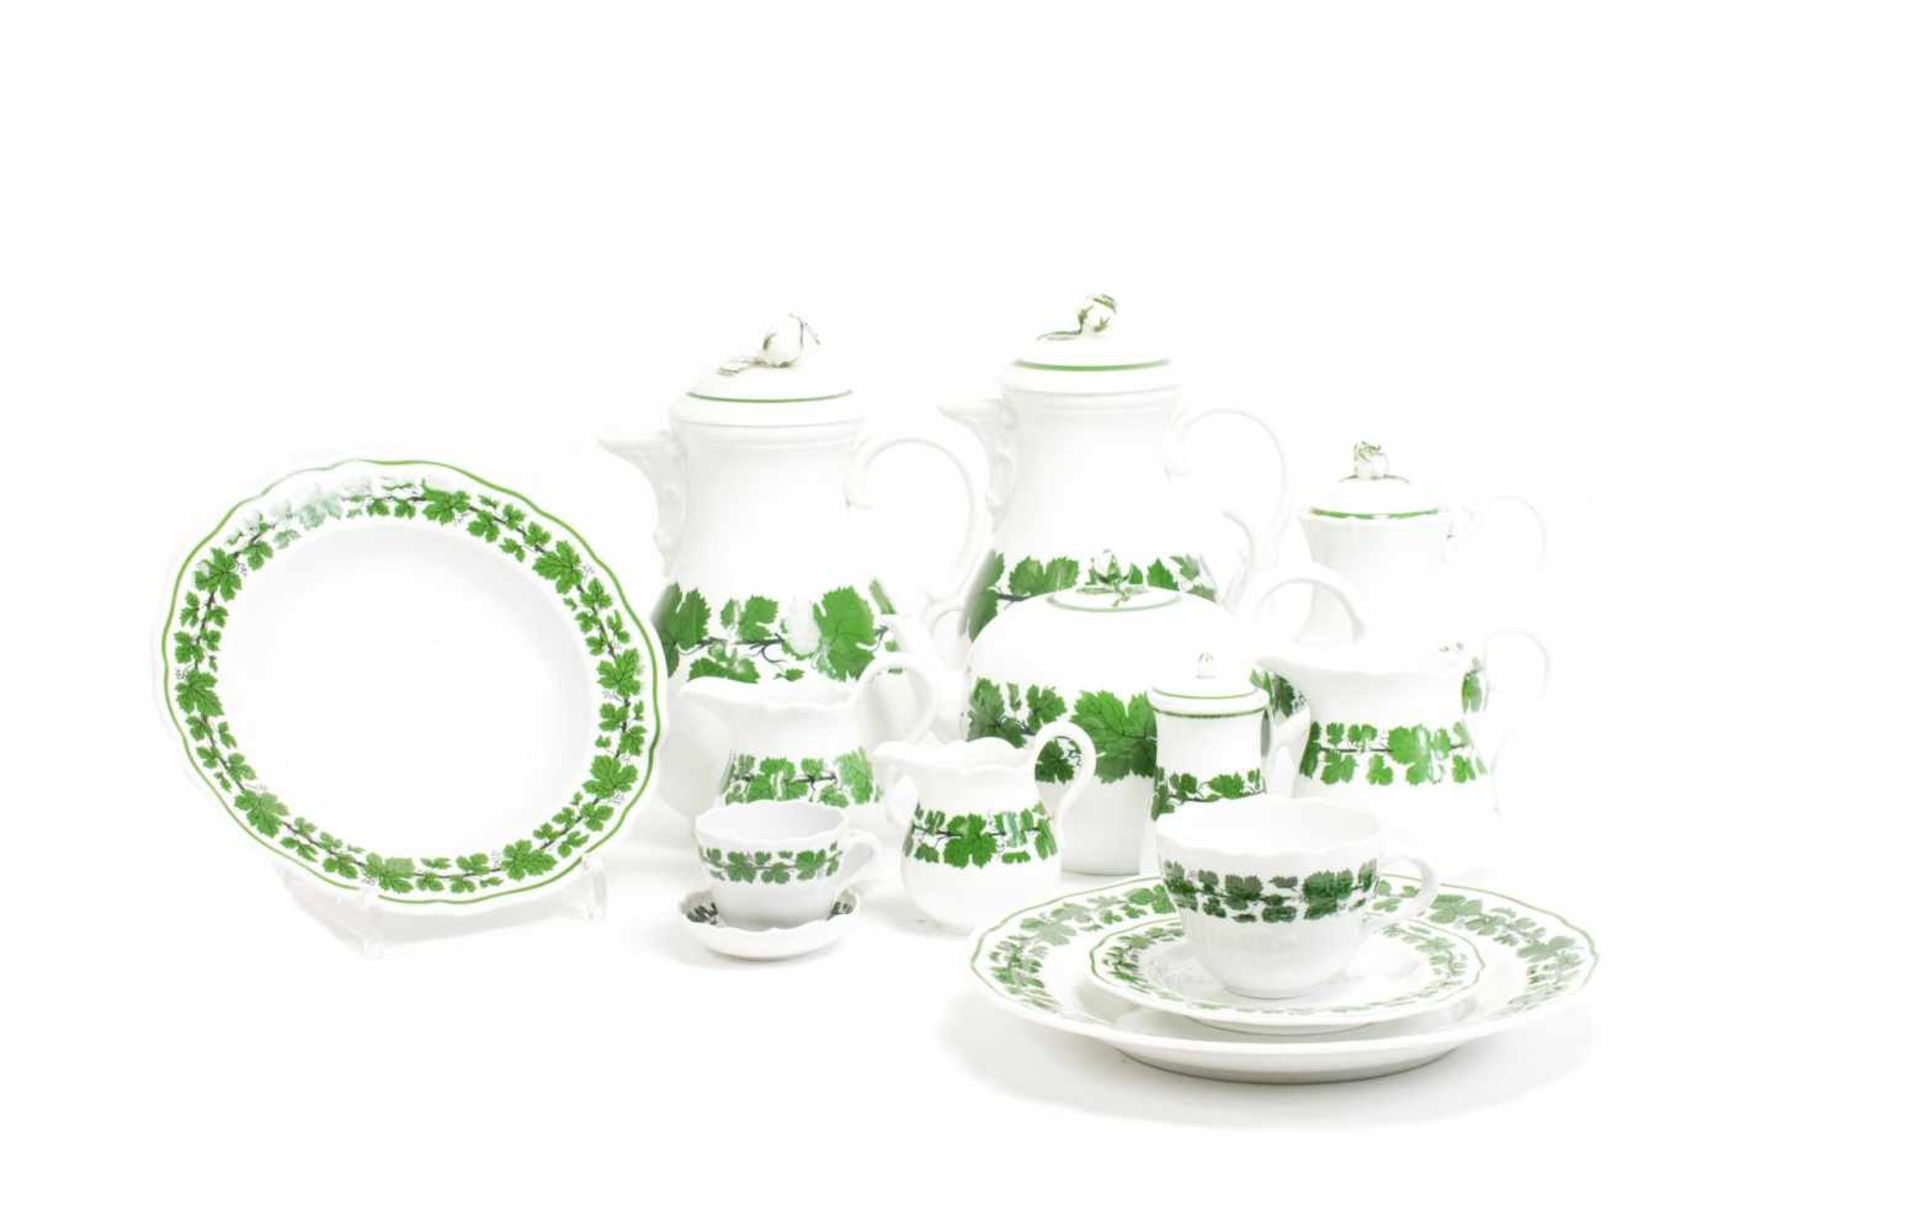 Coffee and dining service for 12 people 157 pieces, Meissen, 19.-20. Century, Decor 'Green